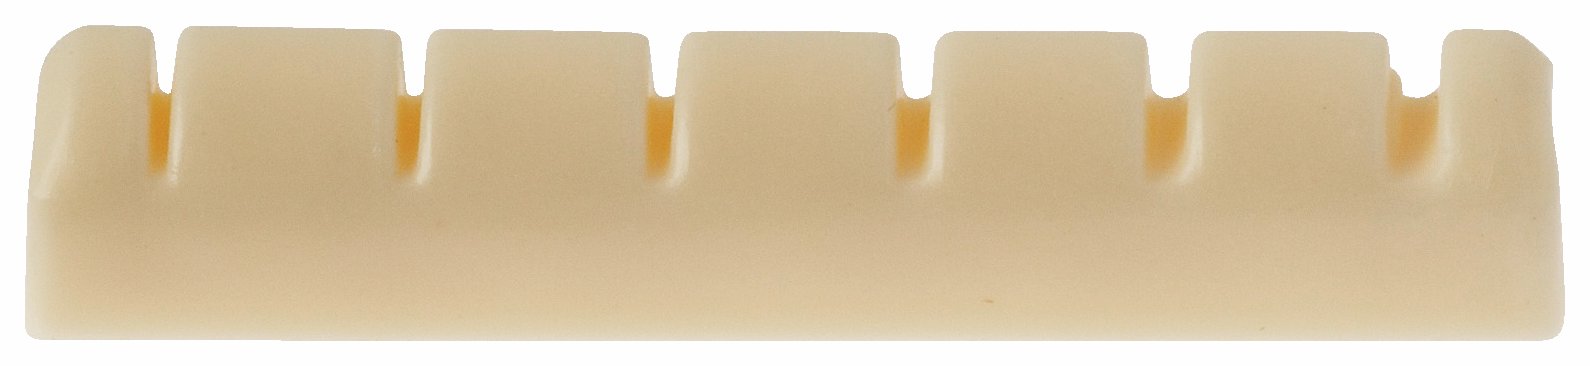 Framus Vintage Parts - Archtop and Thinline Guitar Nut, 6-String